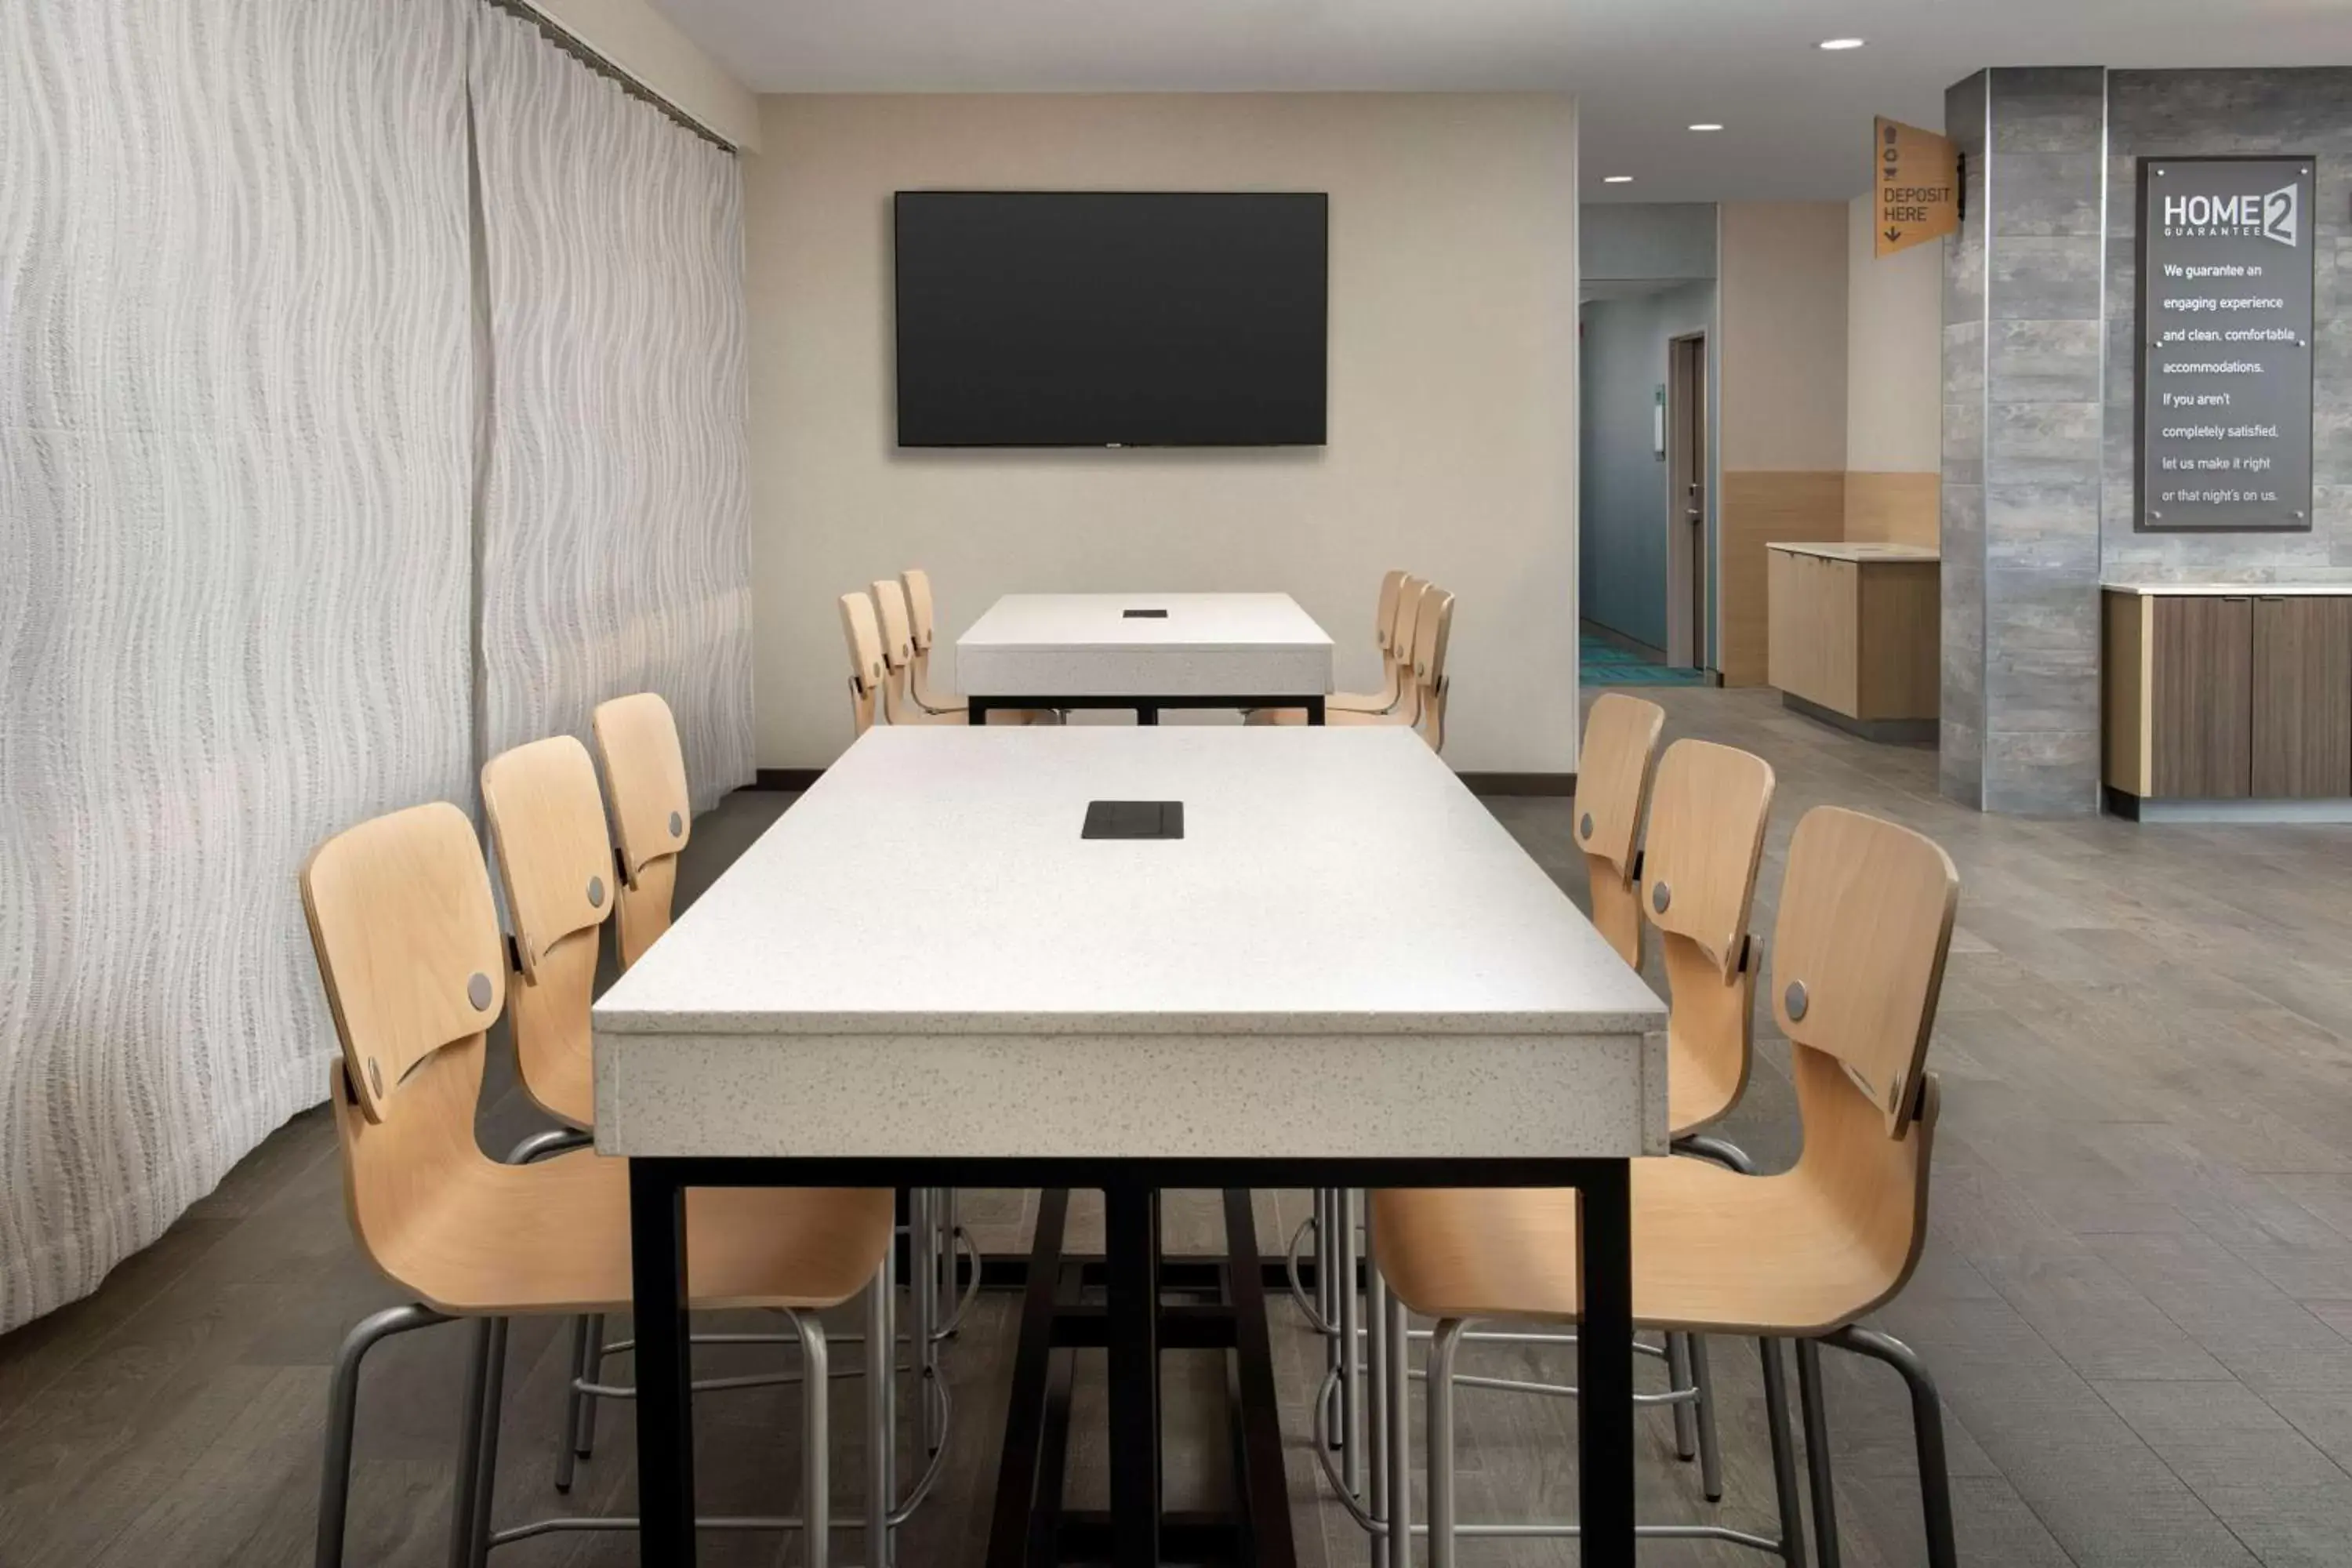 Meeting/conference room in Home2 Suites By Hilton Kenner New Orleans Arpt